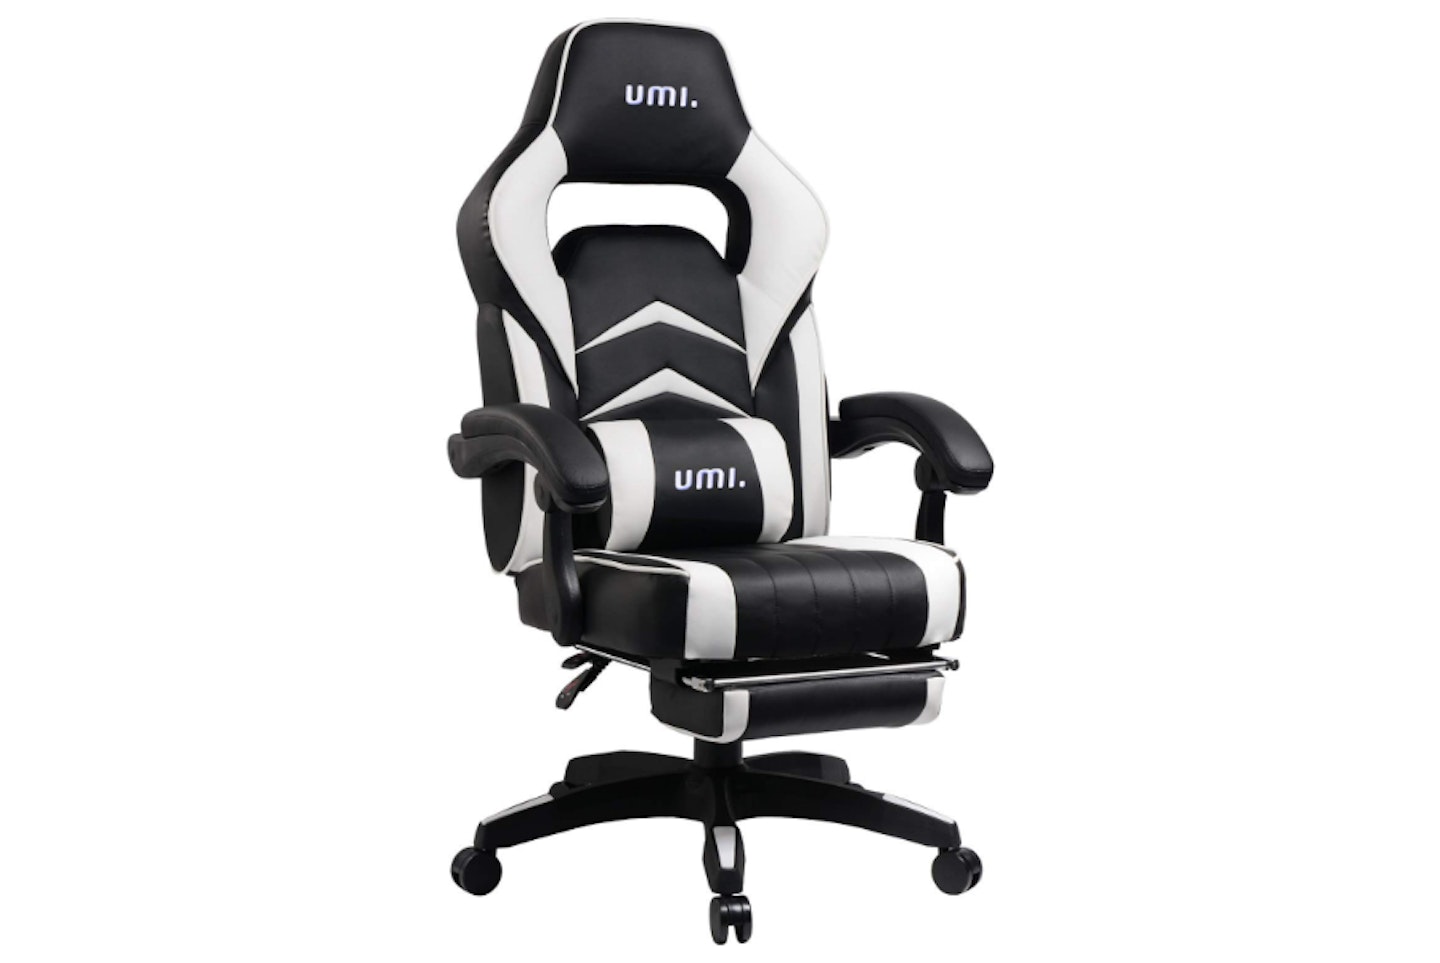 UMI Gaming Office Chair, £134.99